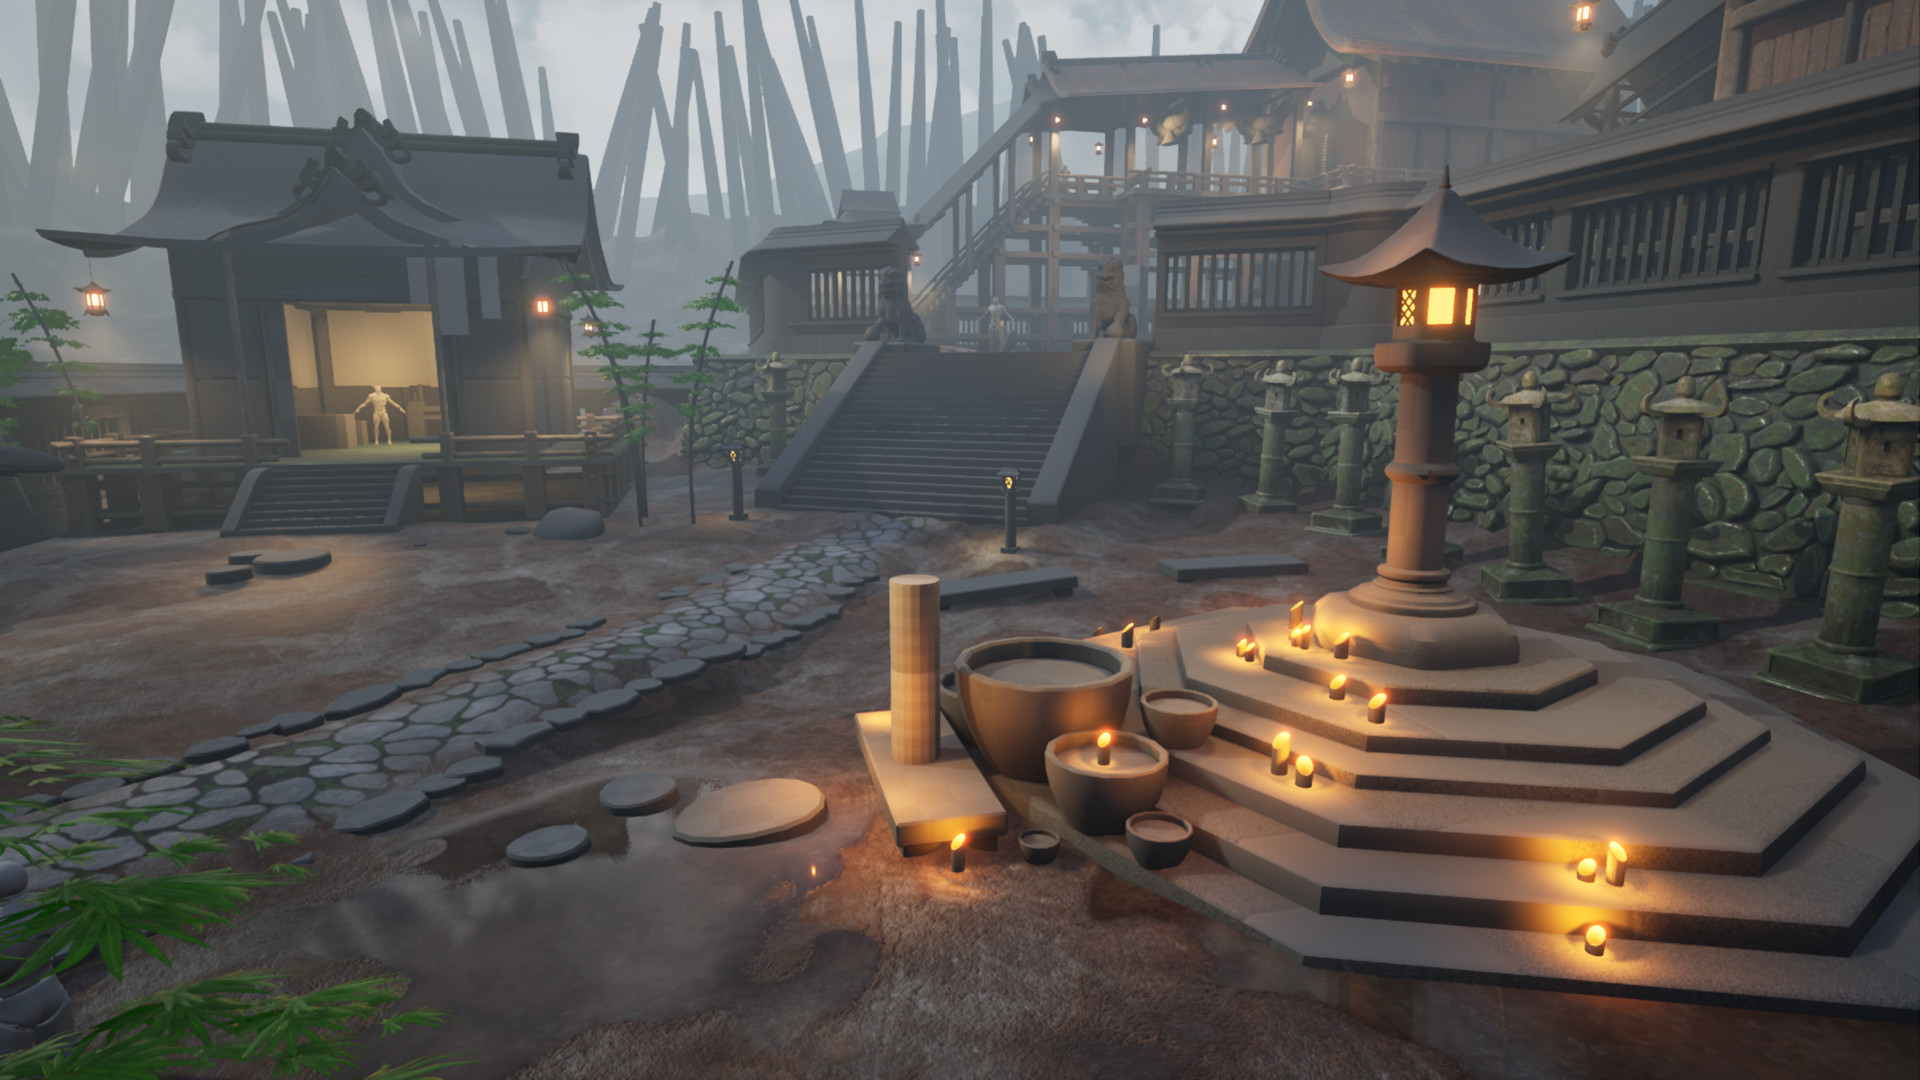 Screenshot from the middle of creating “The Animal Shrine”. UE4 shot that portrays a little shrine with placeholder blocks. To the left is a calligraphers hut and an Unreal mannequin can be seen in an A pose inside.